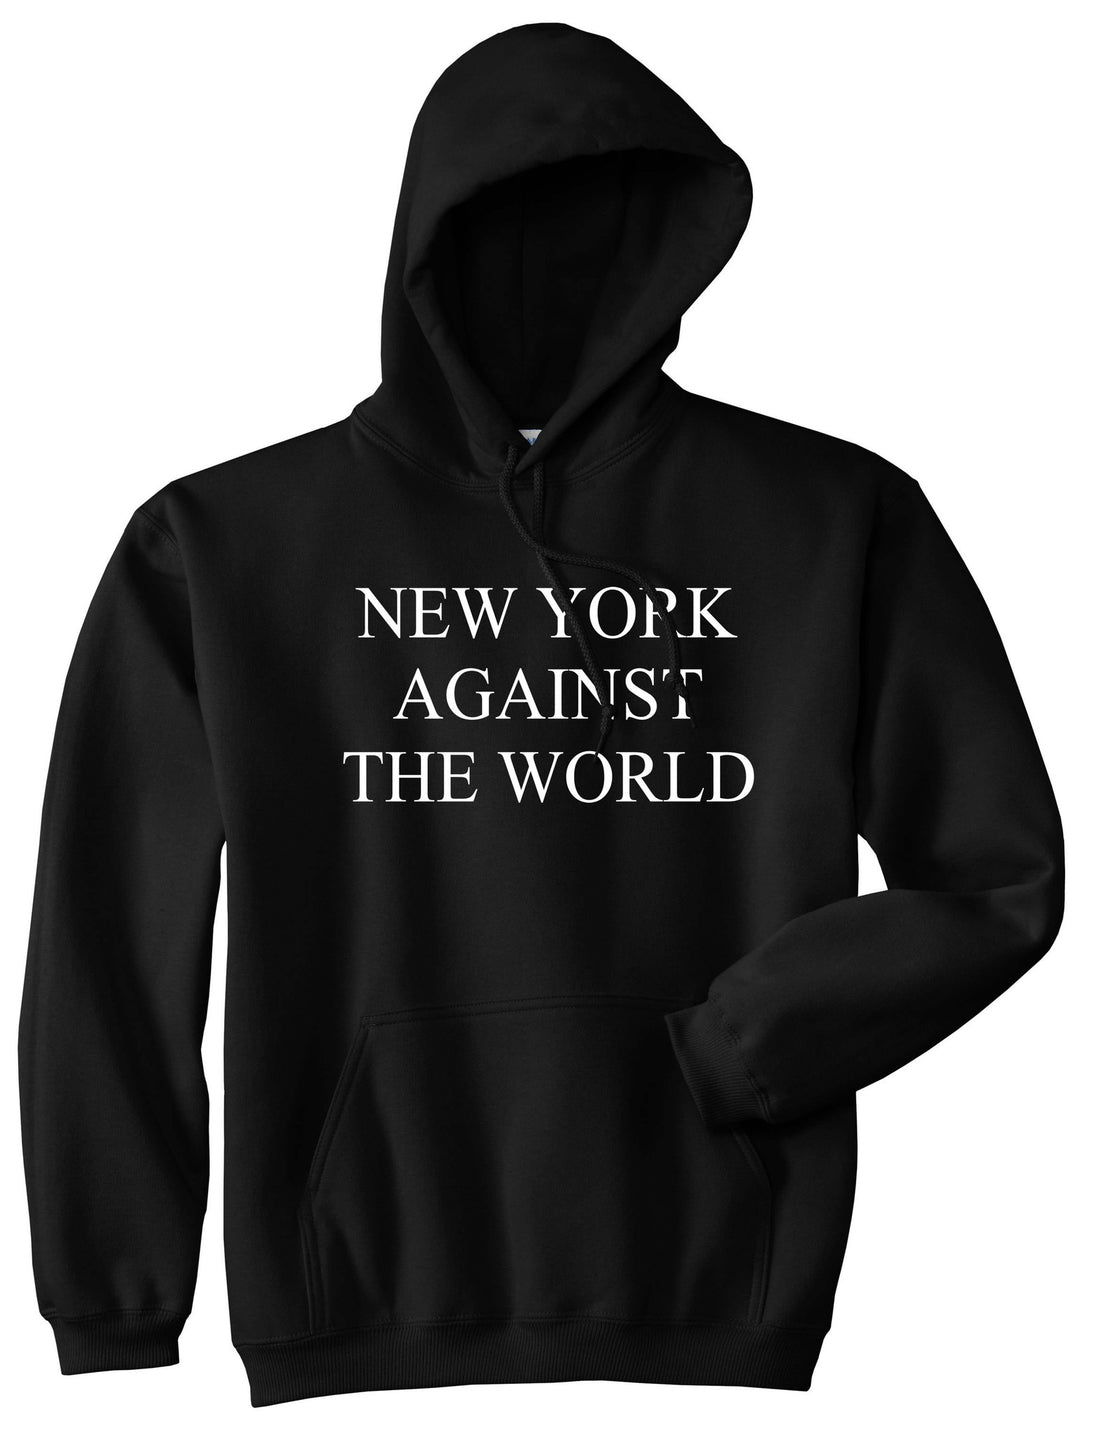 New York Against The World Pullover Hoodie Hoody in Black by Kings Of NY